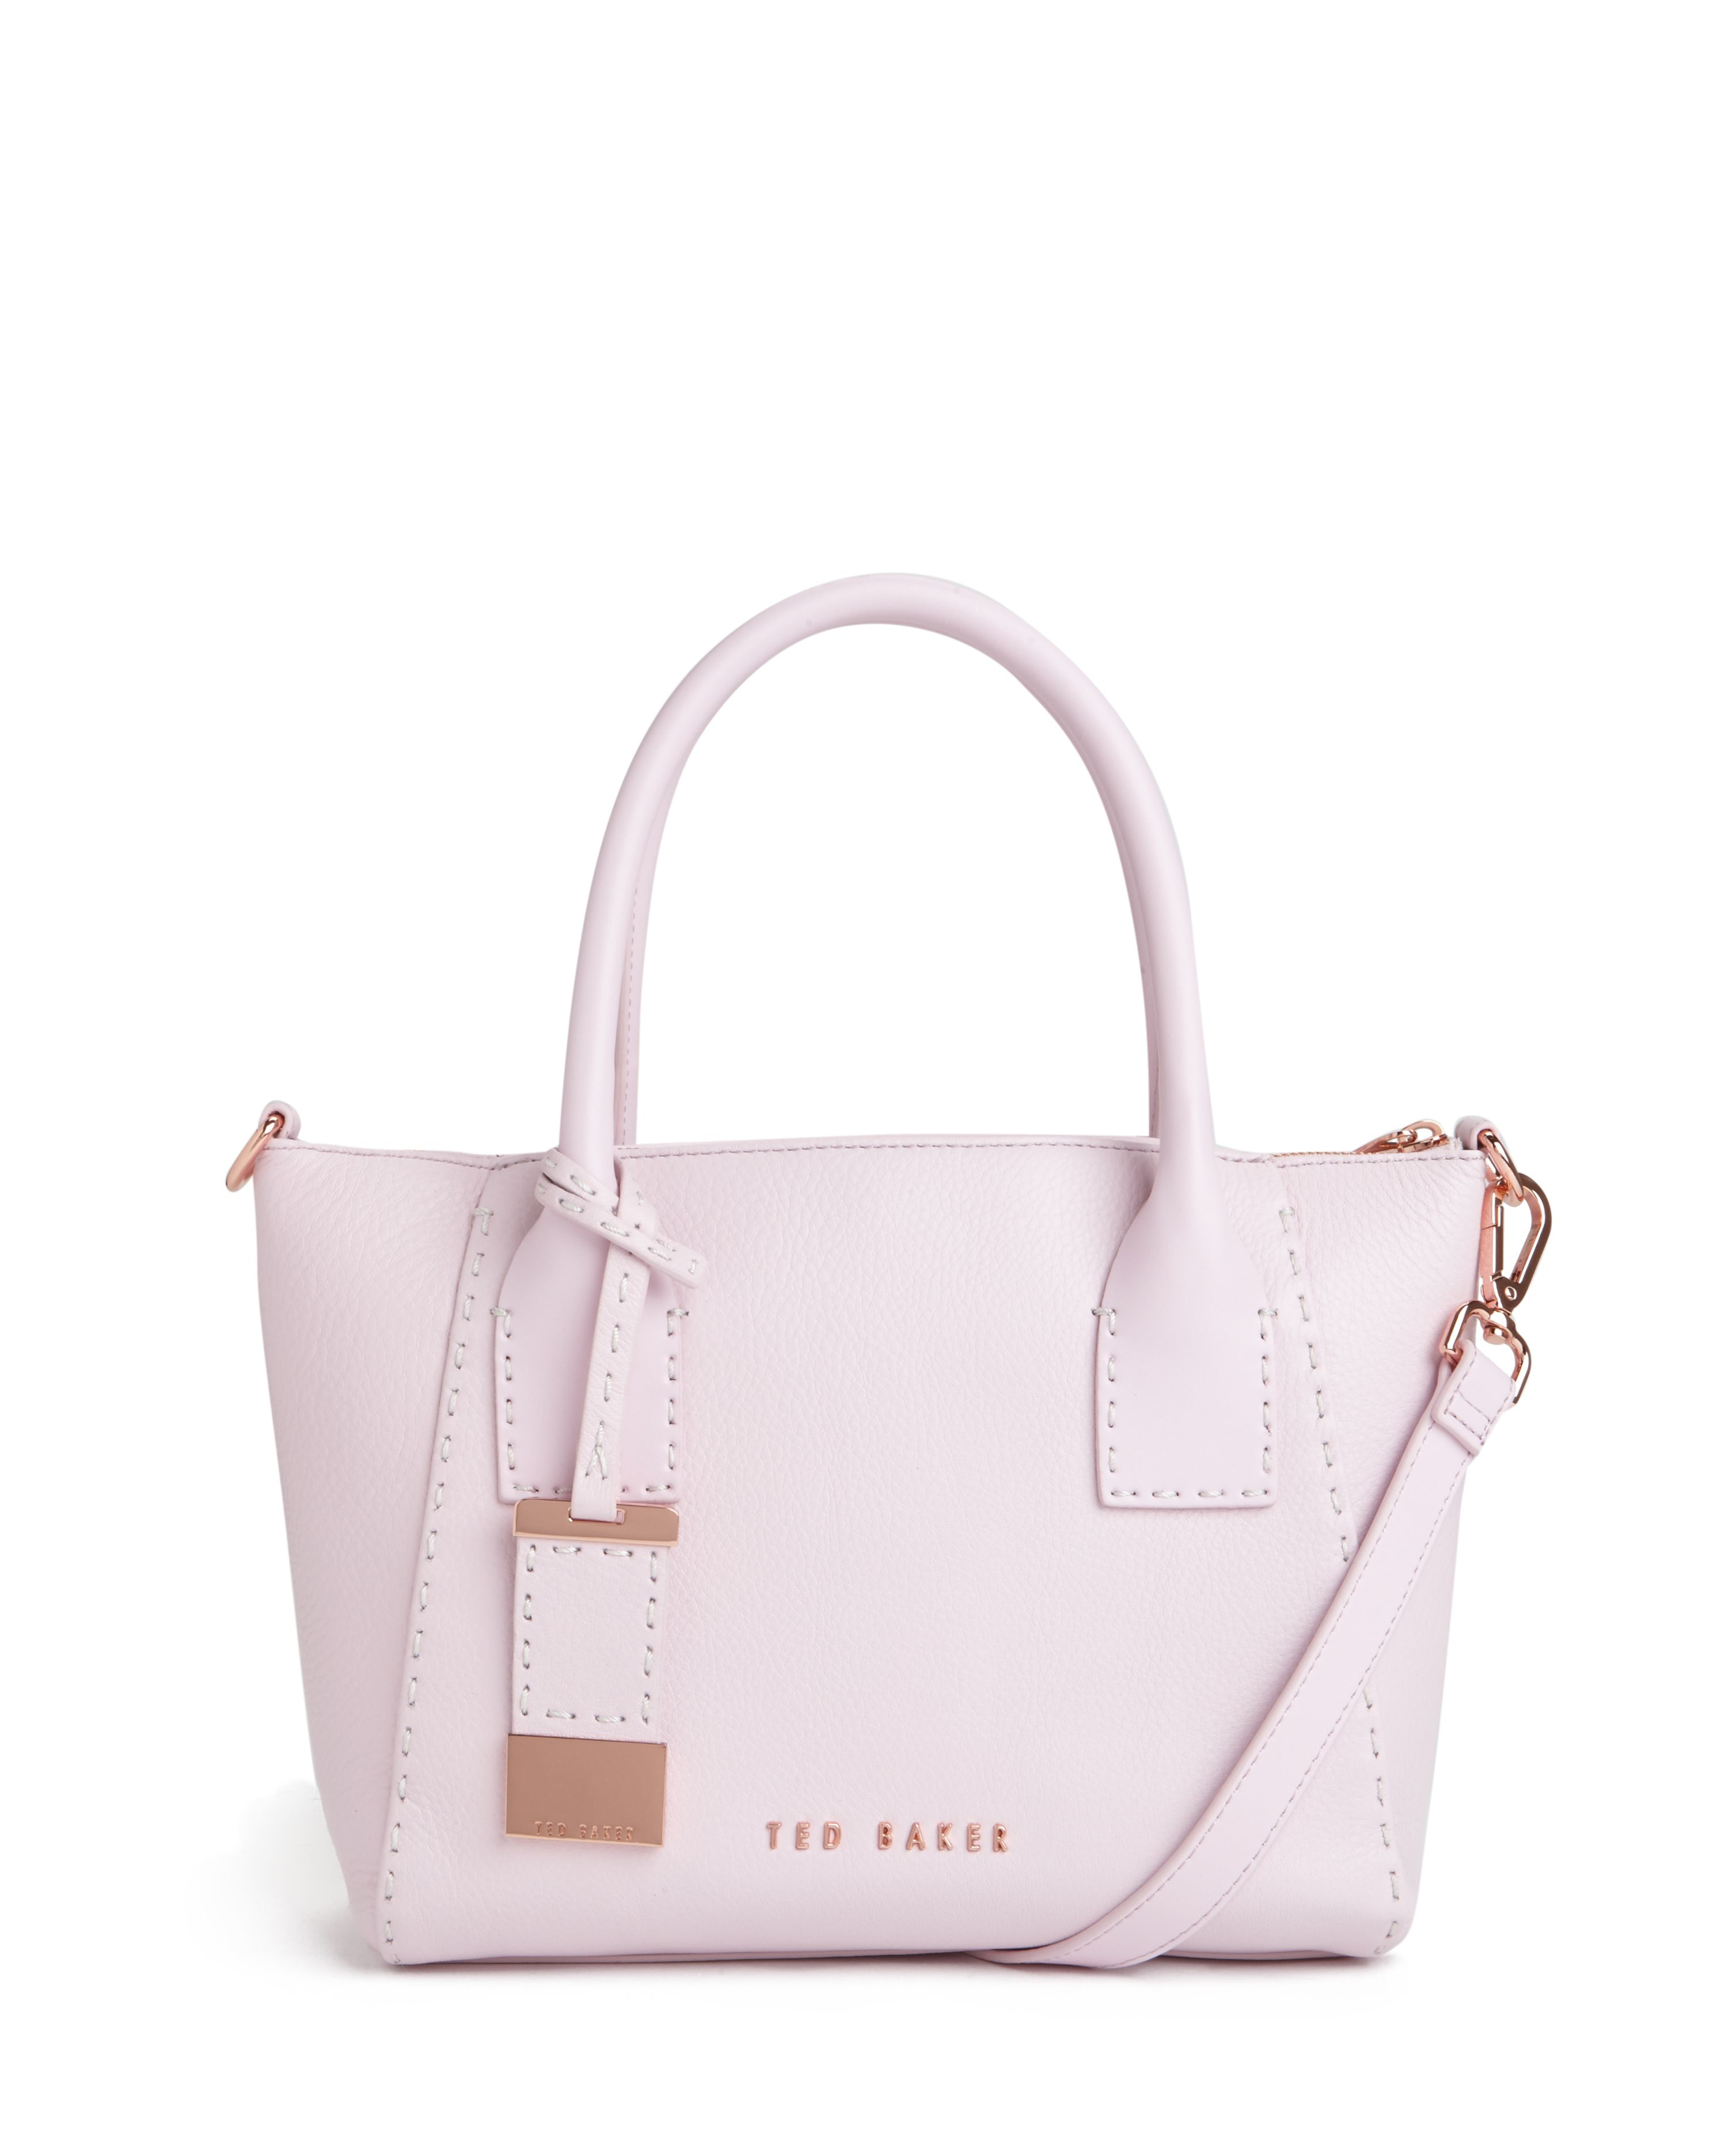 Ted baker Lauren Small Leather Tote Bag in Pink | Lyst